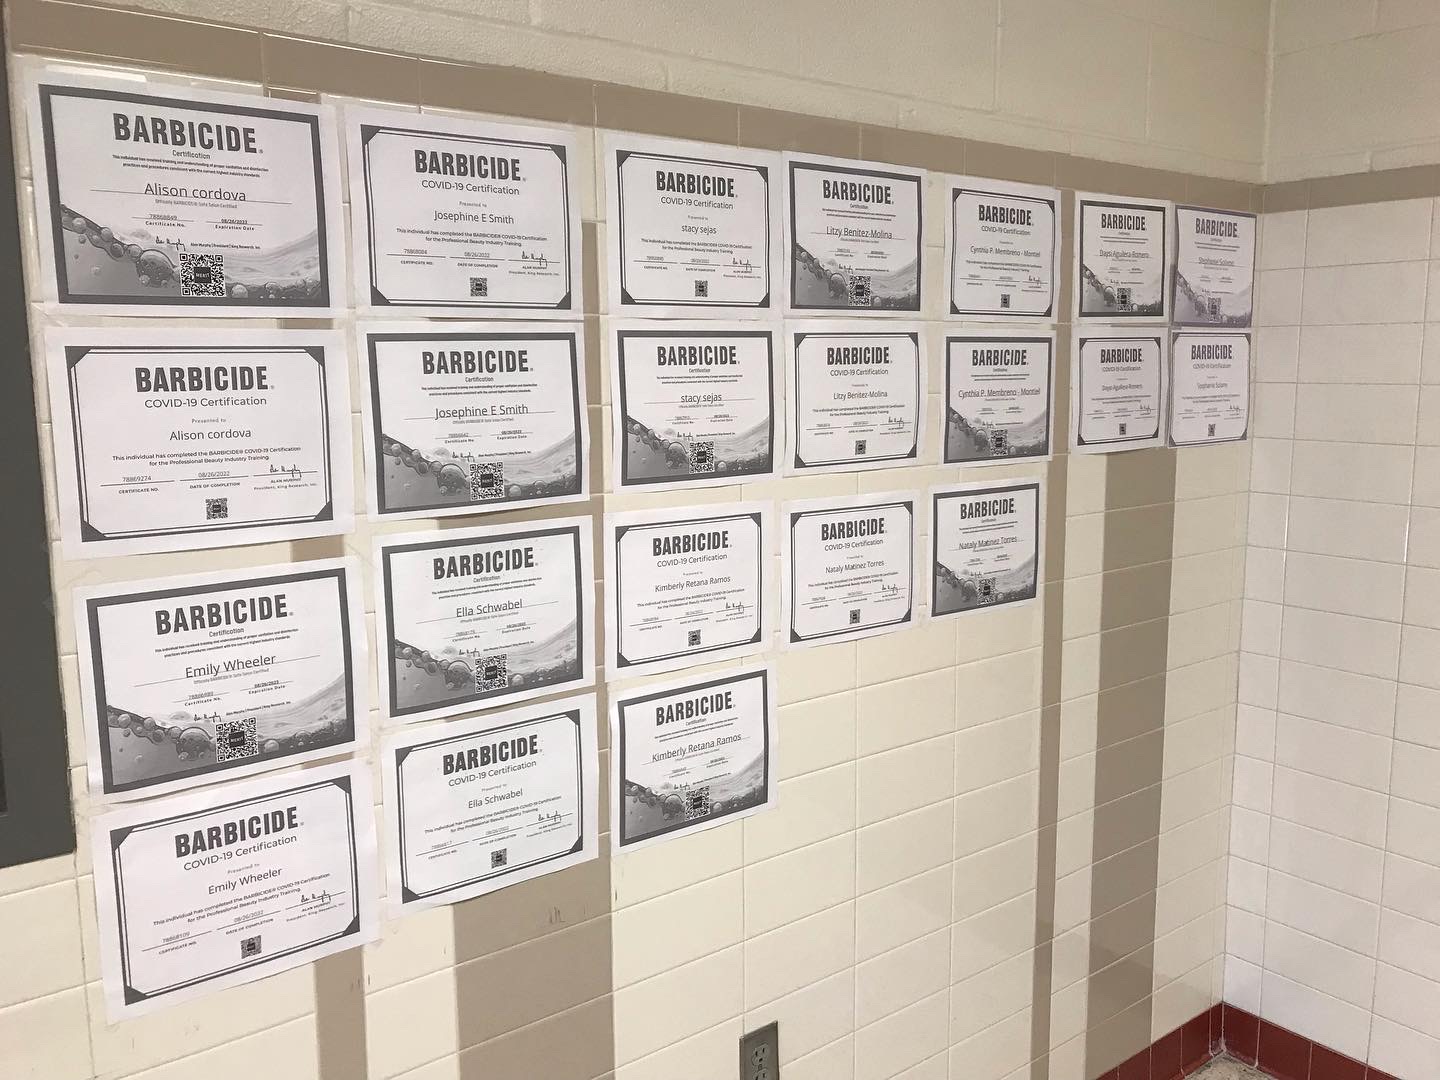 Barbacide Certs from the other side of the classroom door